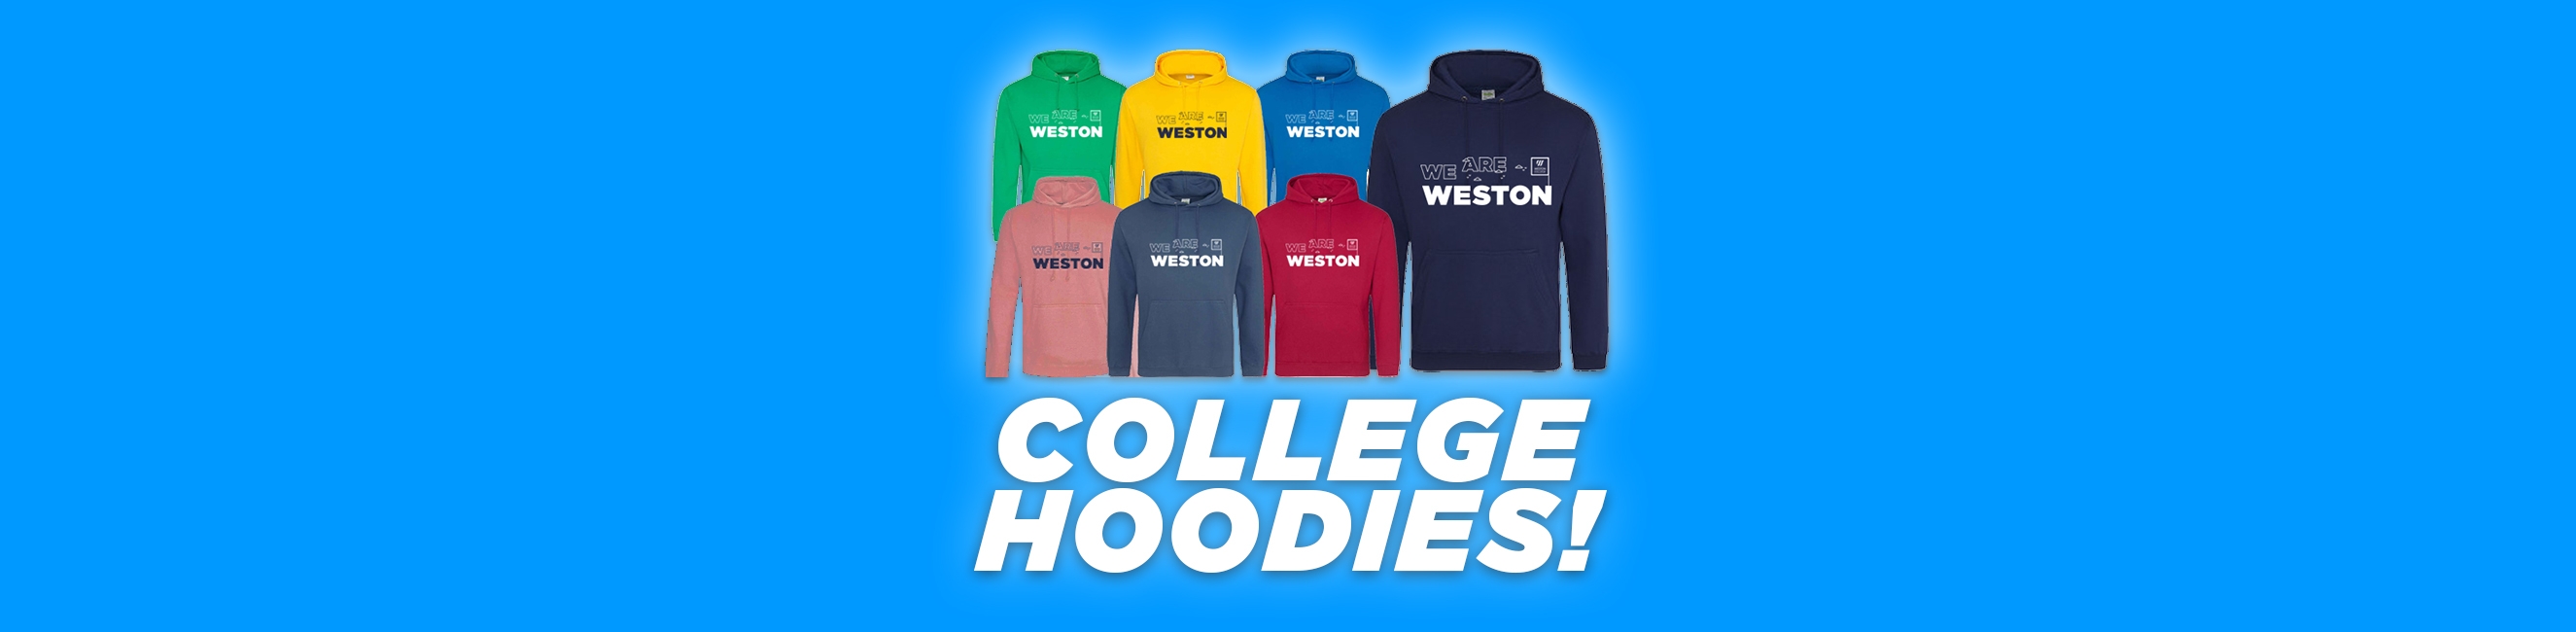 hoodies for weston college students